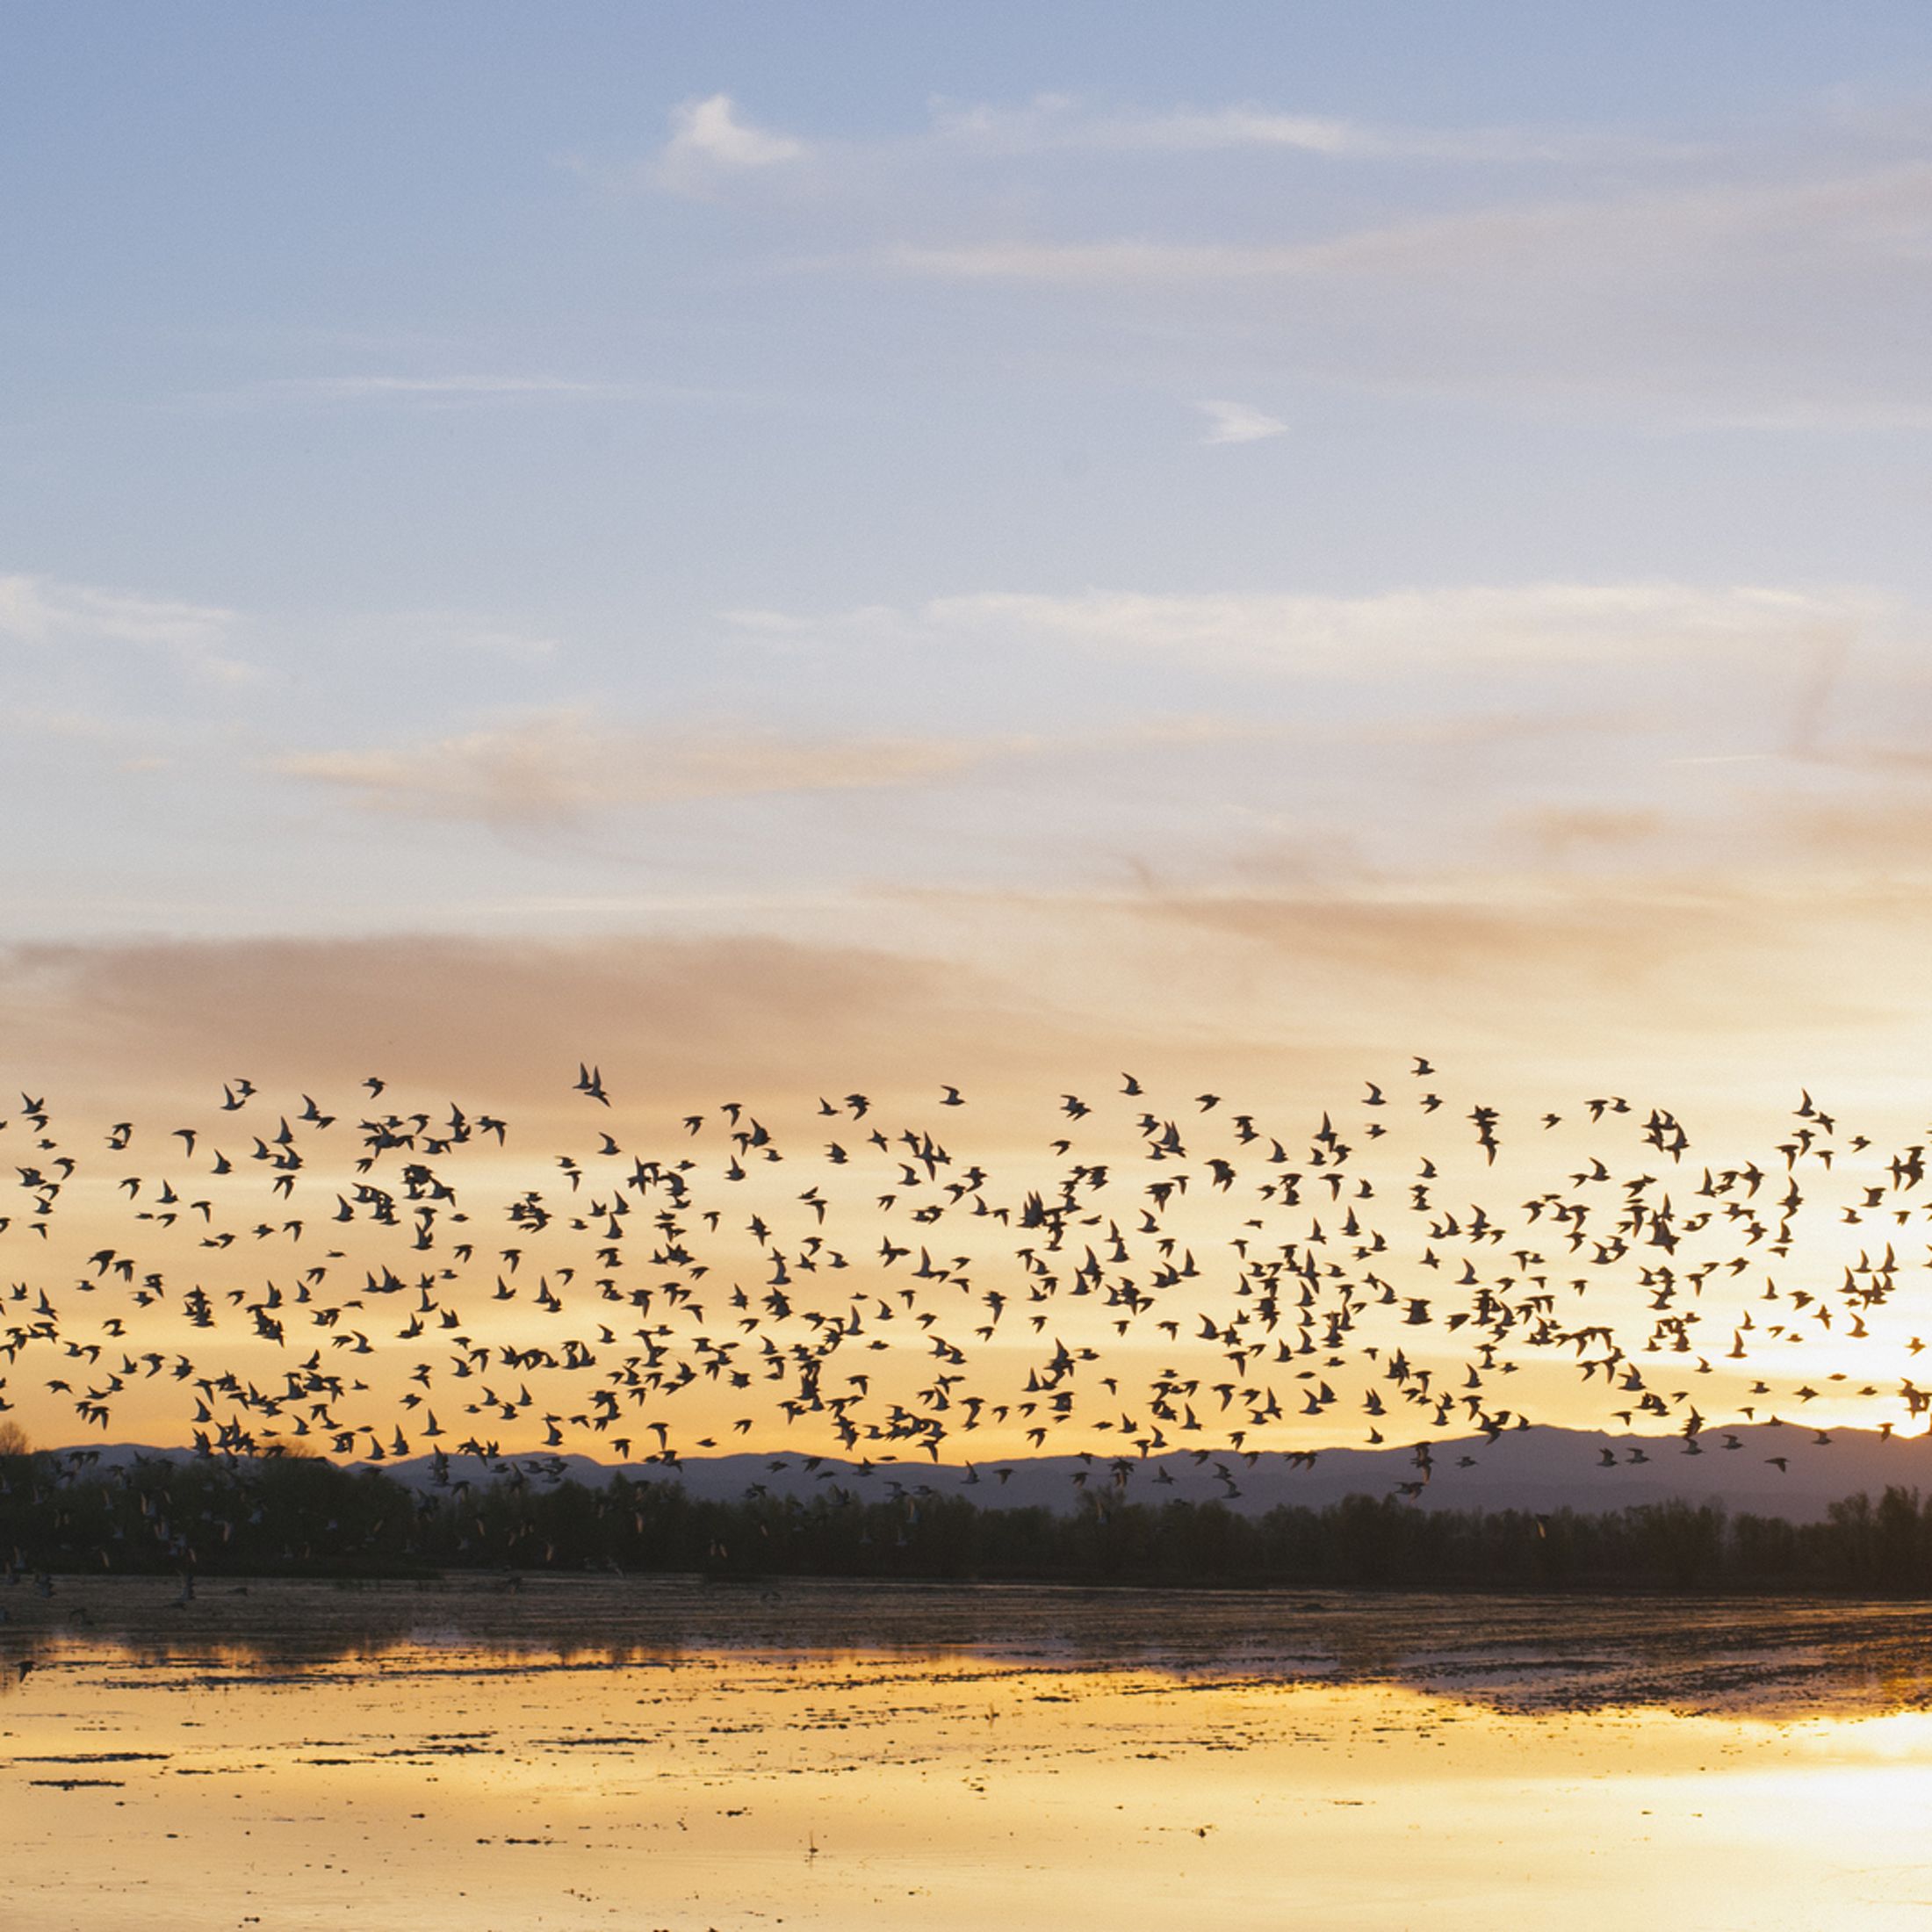 Large flock of birds flying over wetlands with a mountain ridge and sunset in the background.